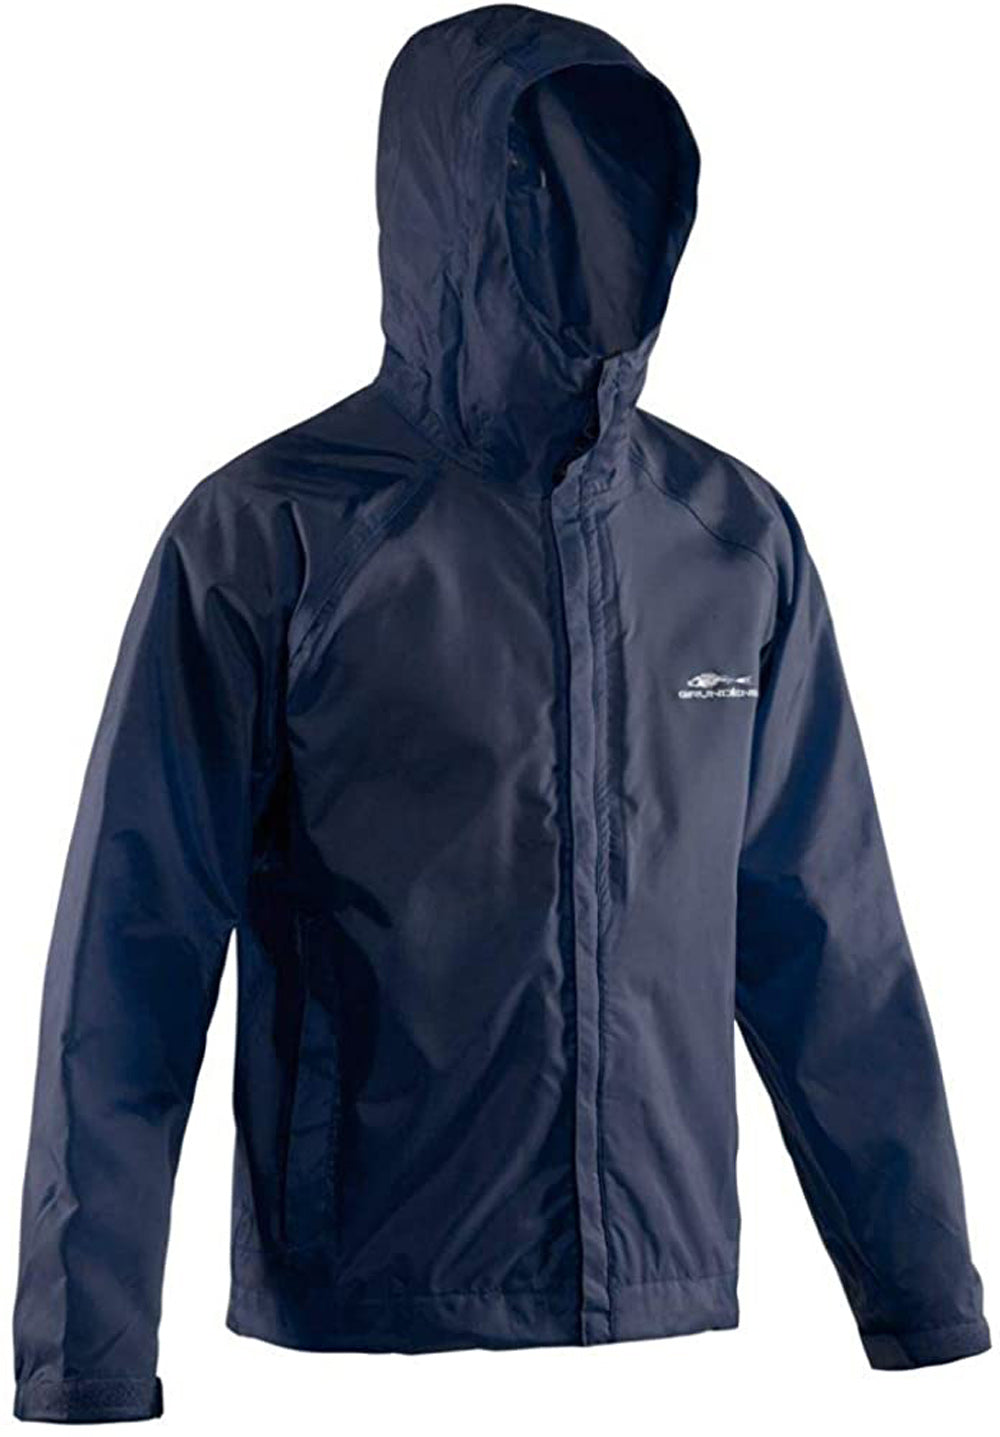 Weather Watch Jacket in Navy color from the front view